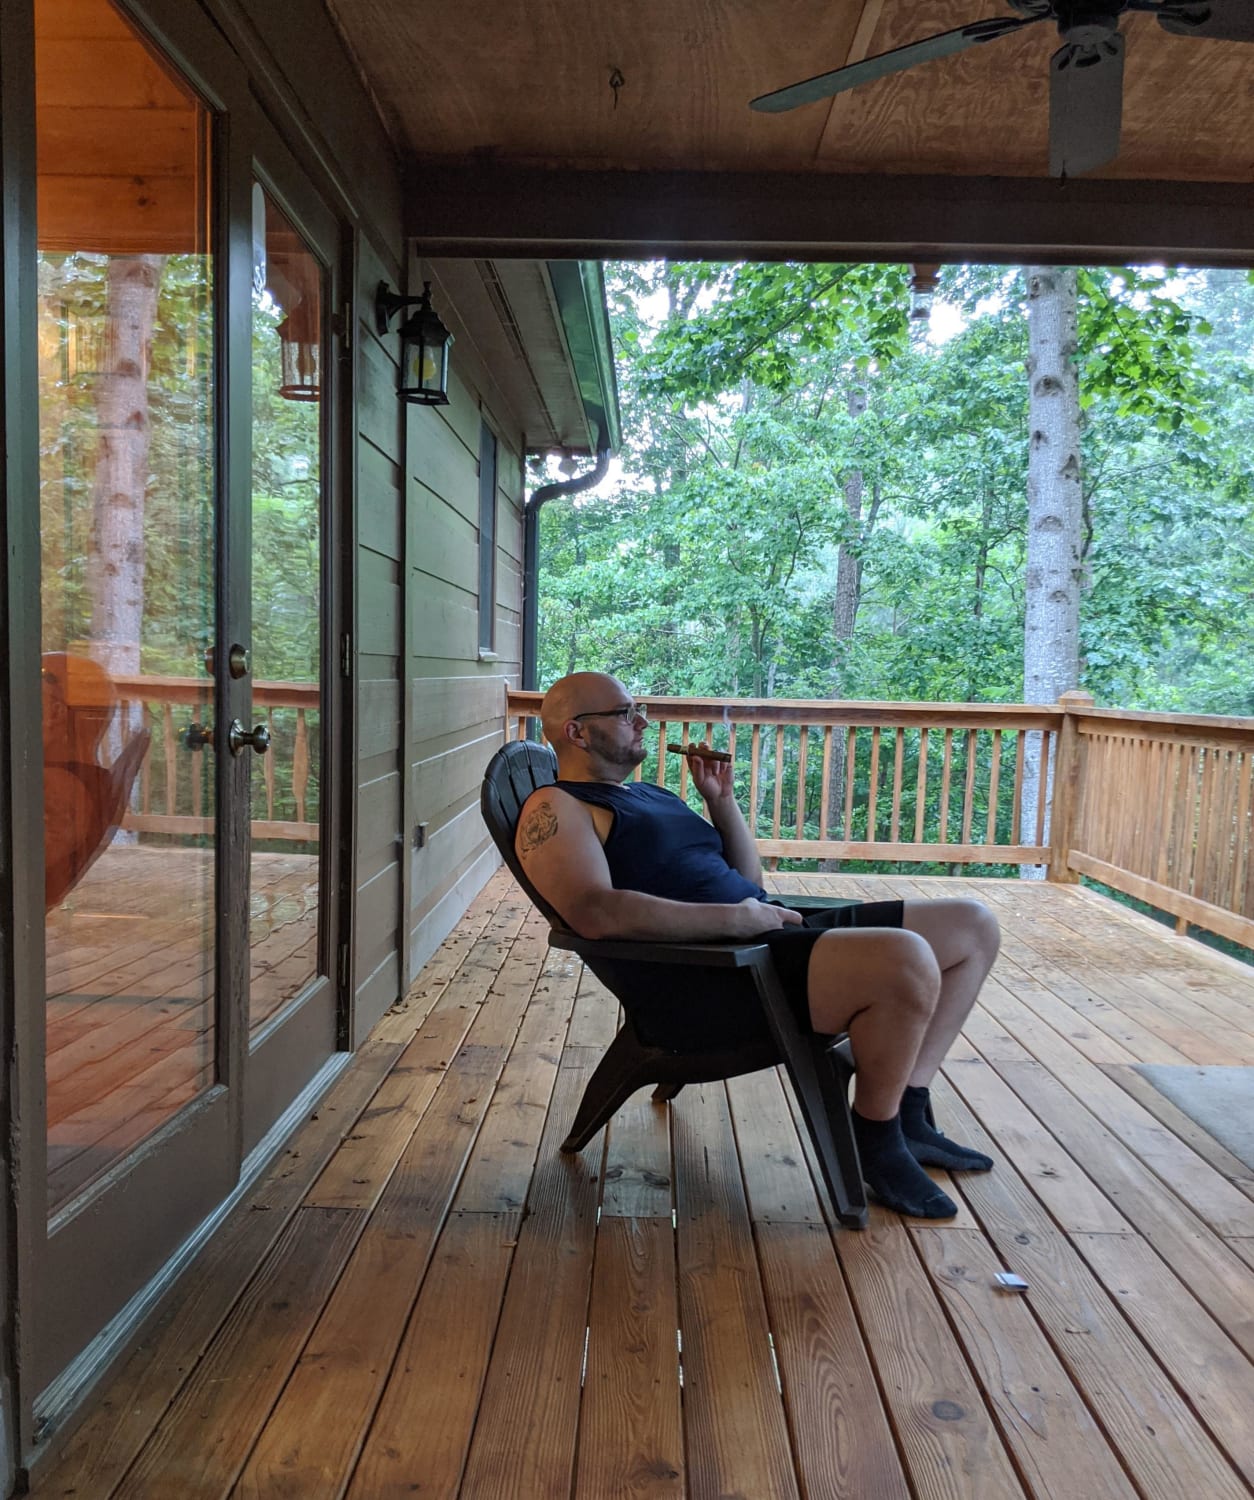 We rented a cabin in the smoky mountains for a few days to try to de stress from our crazy work schedules. The best part was sitting on the porch watching the rain.